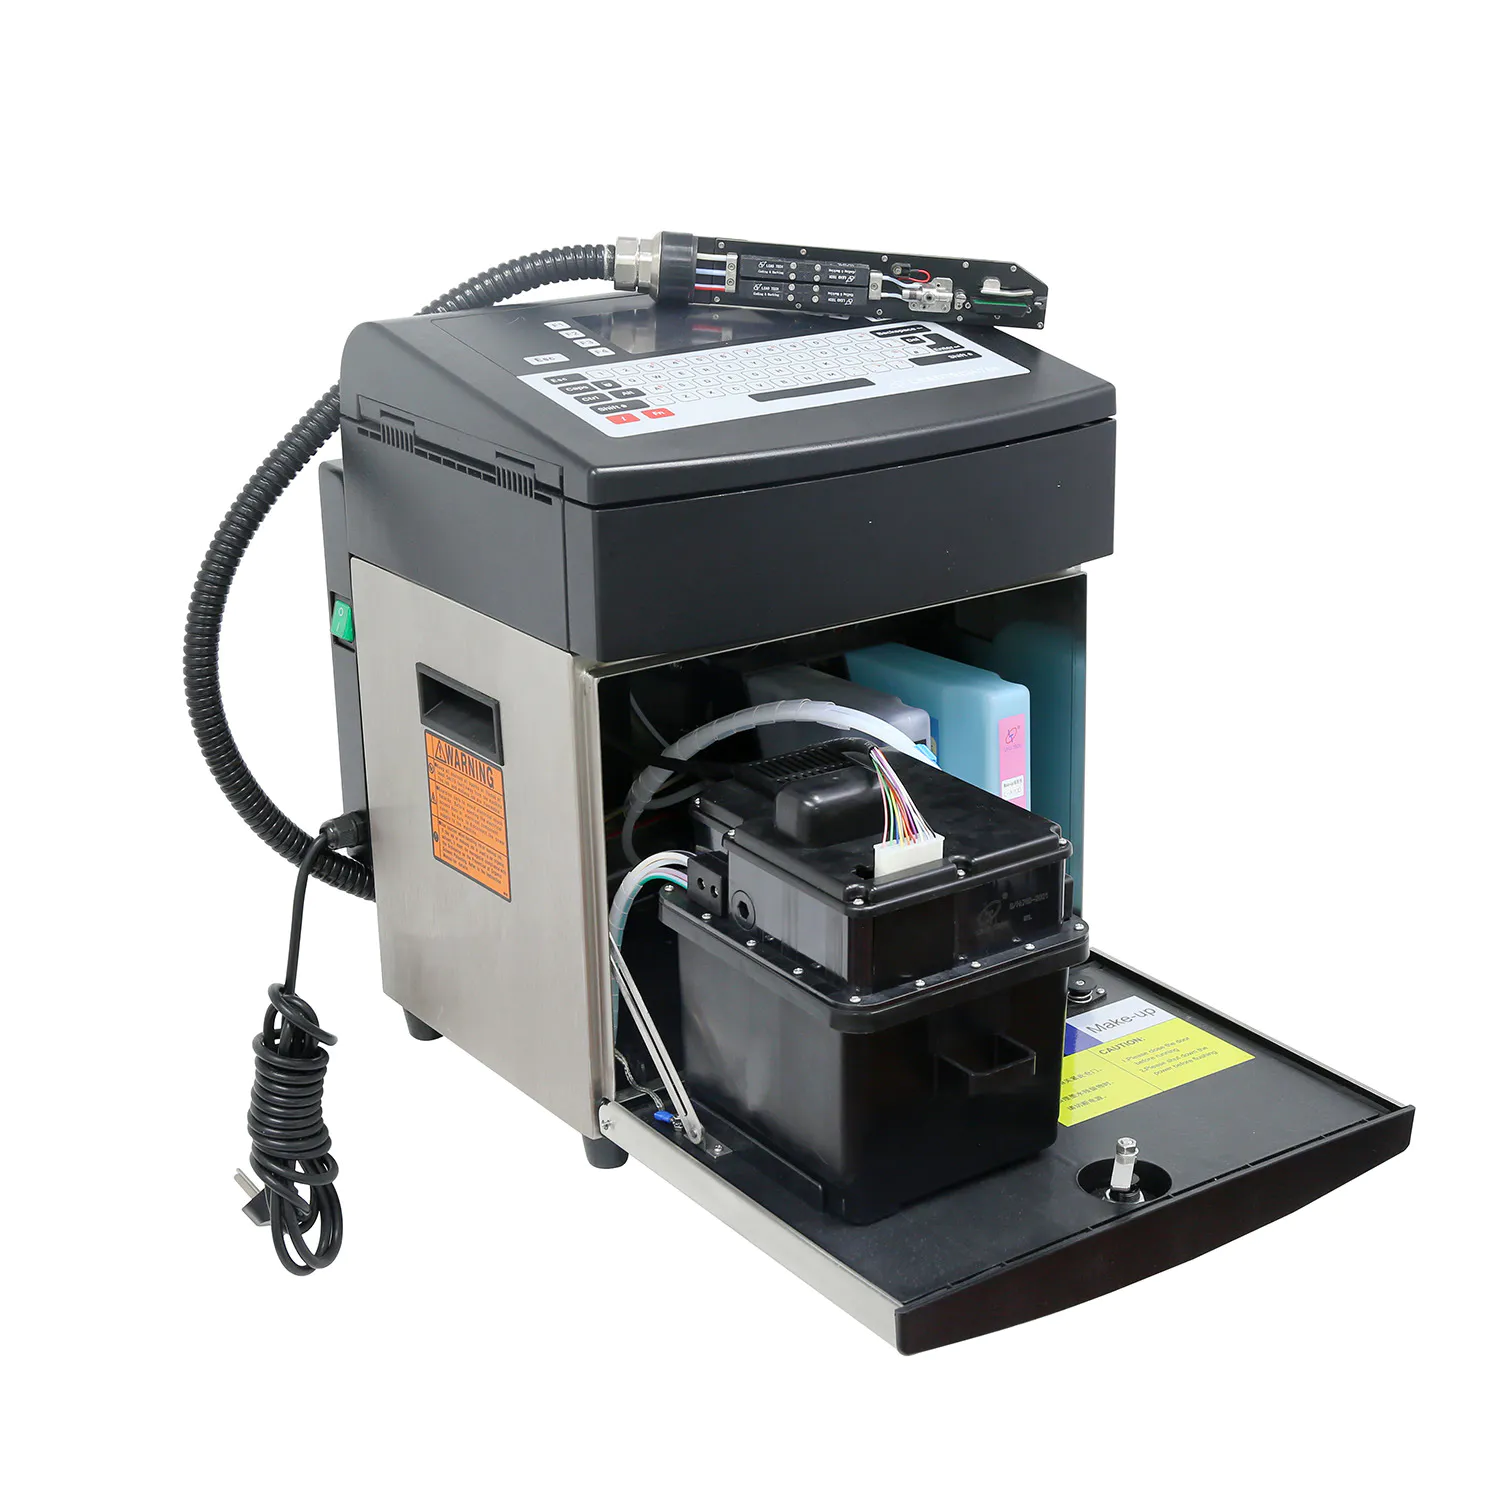 Lead Tech Lt760 High Speed Printer for Dates